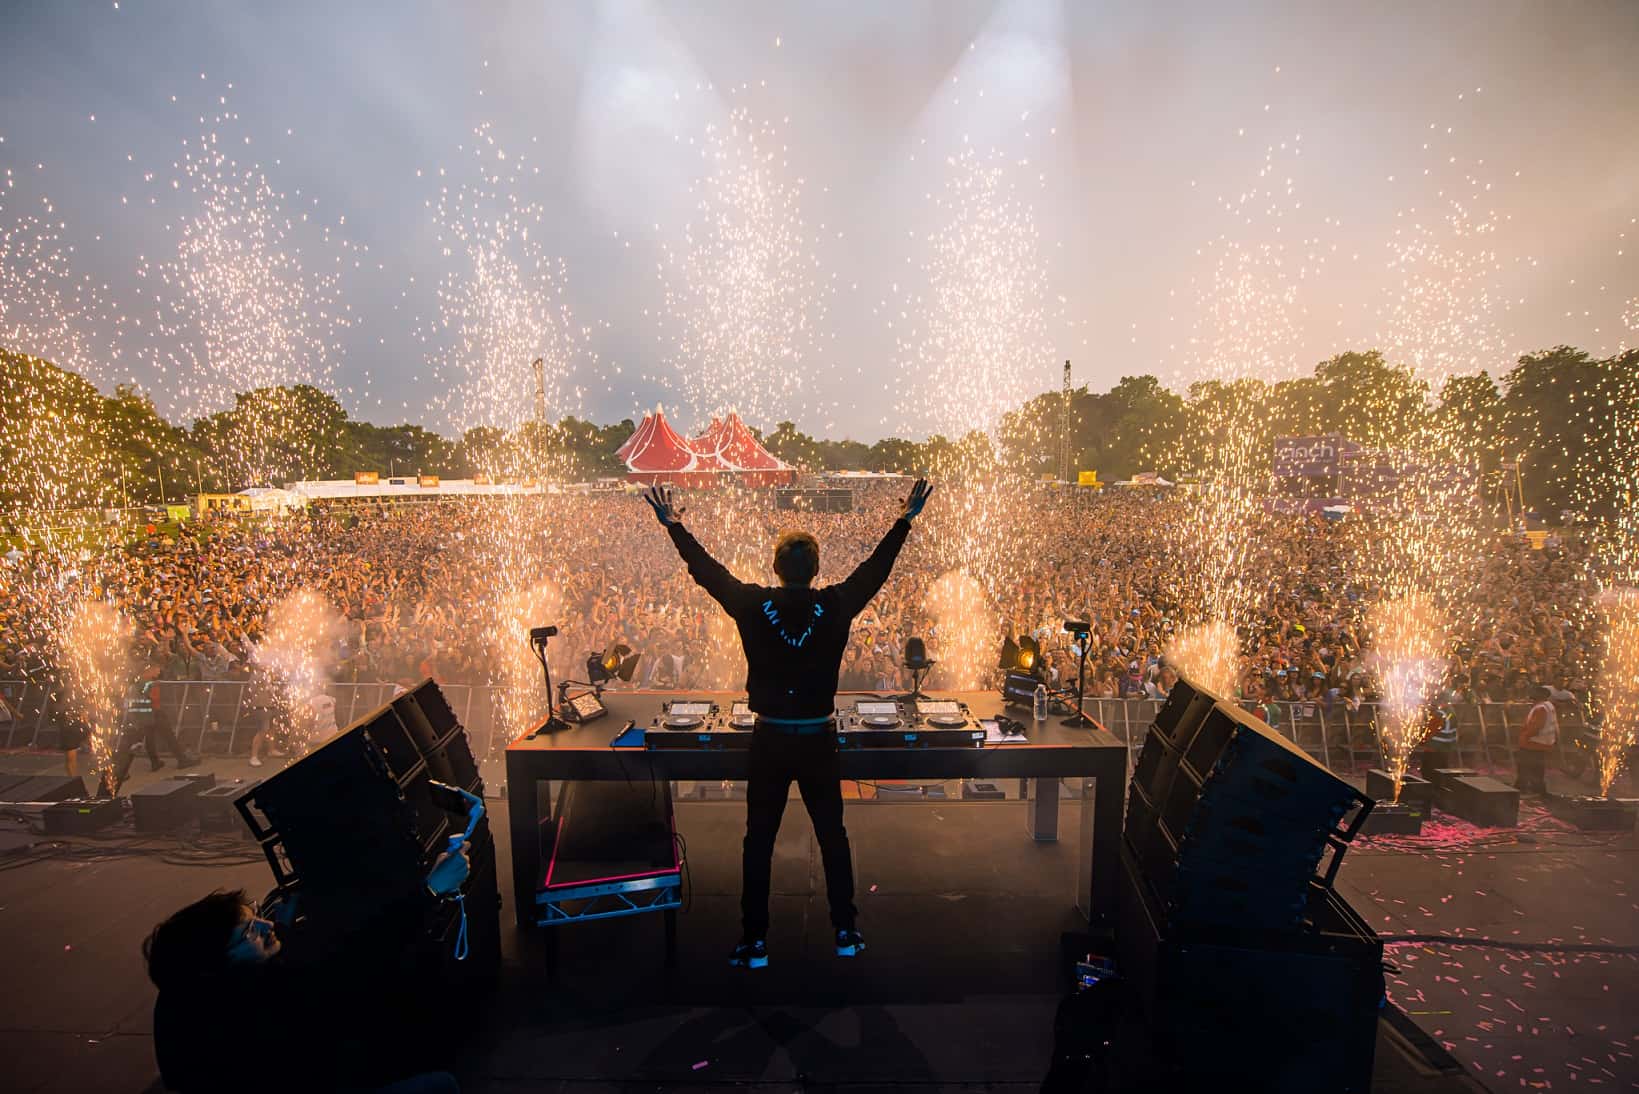 A Complete Review of Creamfields South 2022 [Magazine Featured]